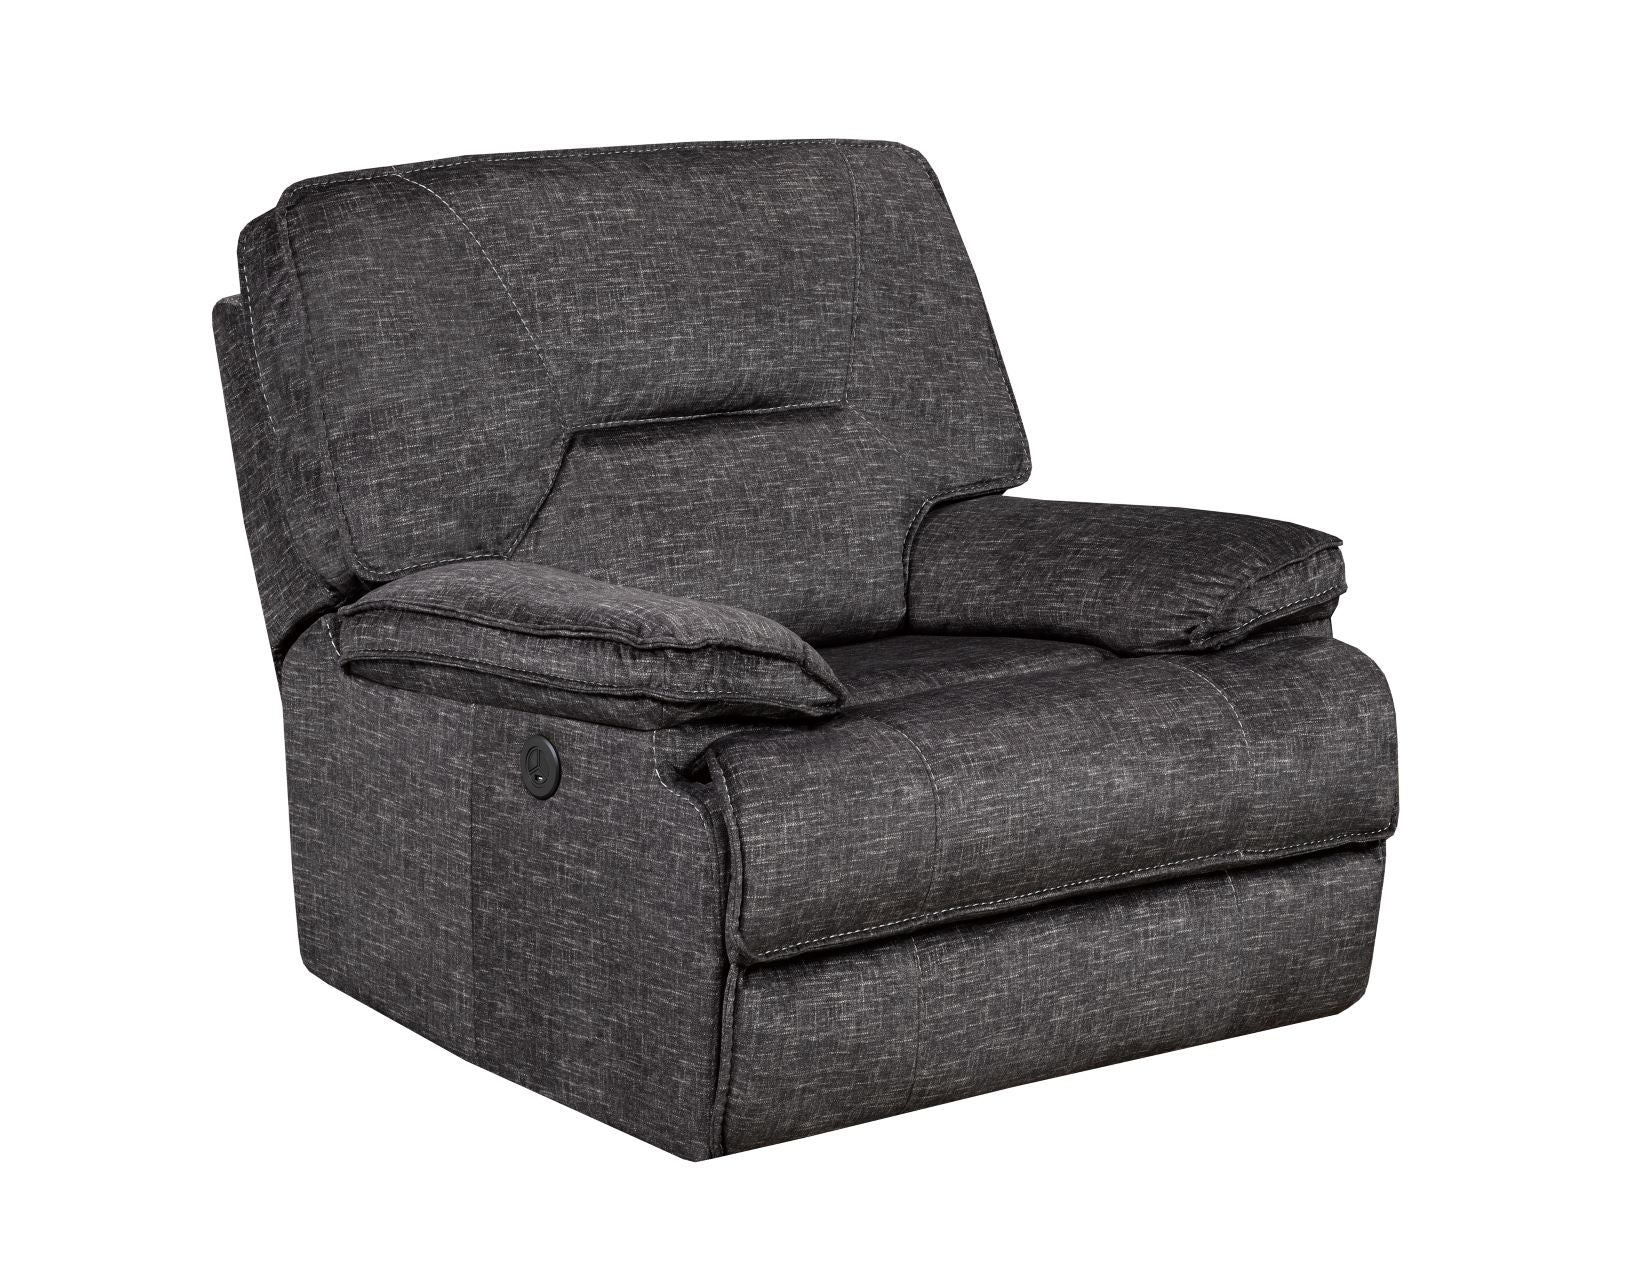 Maryland Power Recliner Sofa Collection - 6500